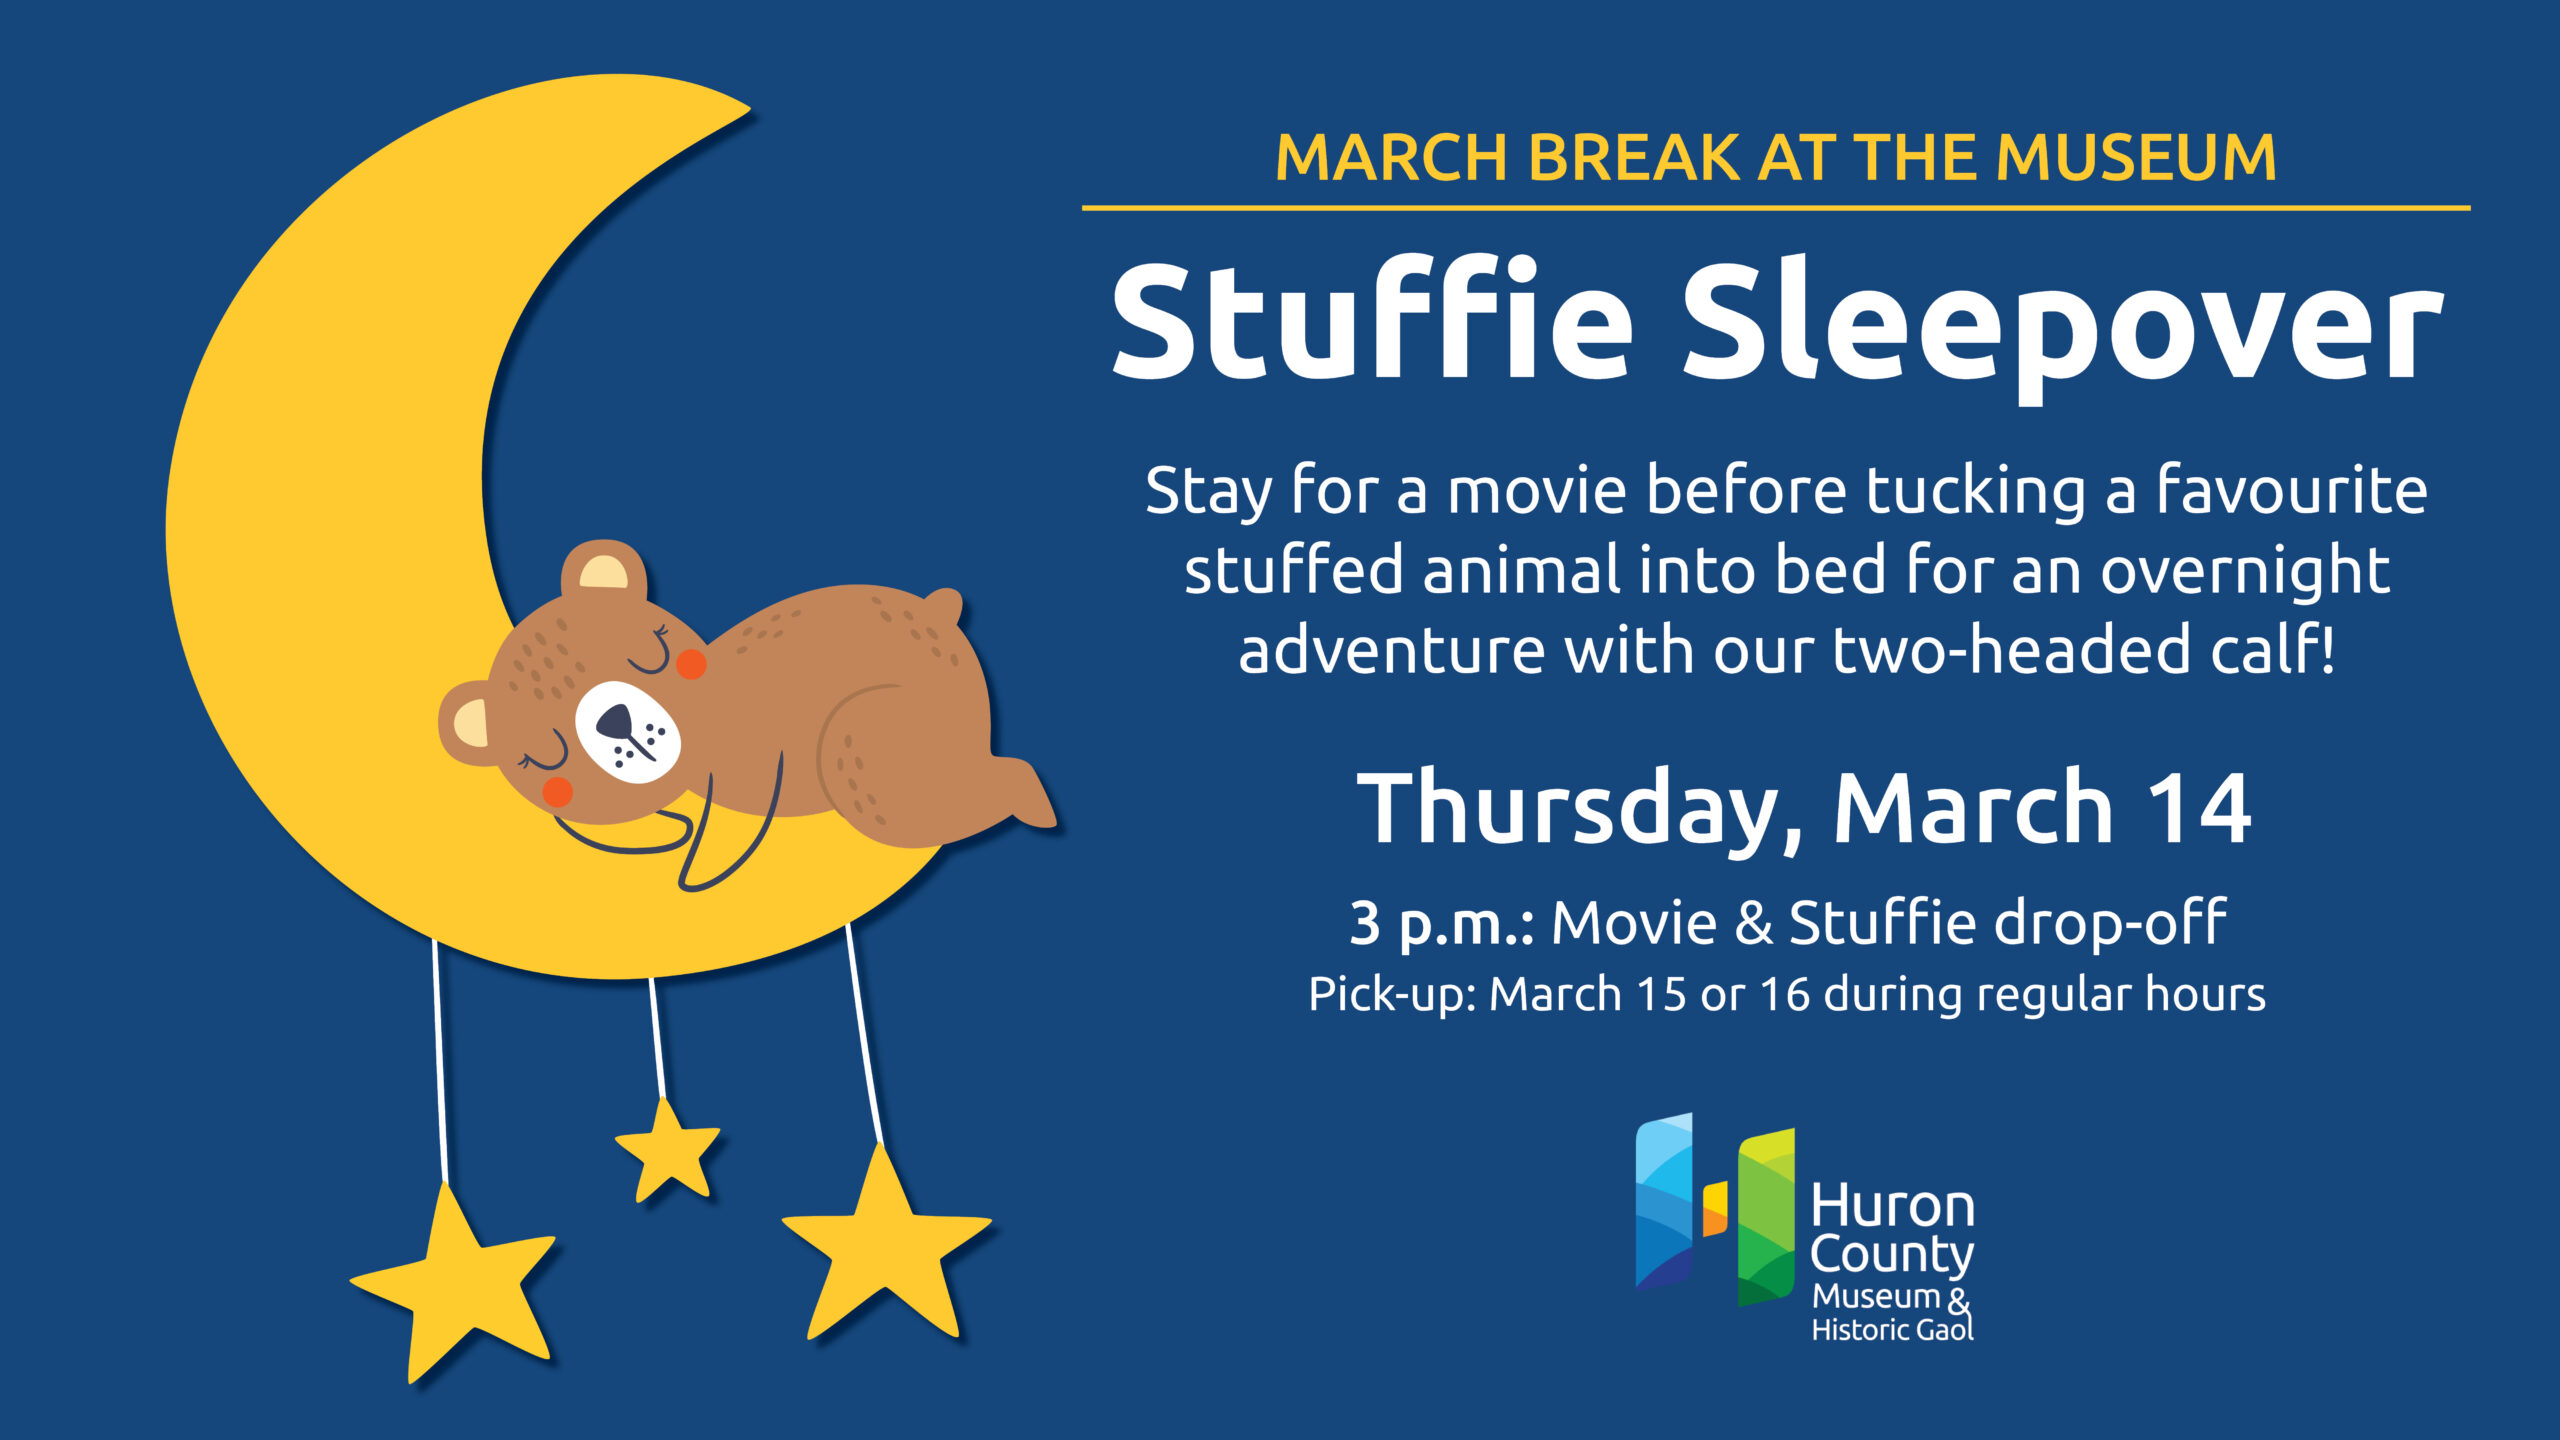 Illustration of a teddy bear sleeping on the moon with text promoting stuffie sleepover at the Museum